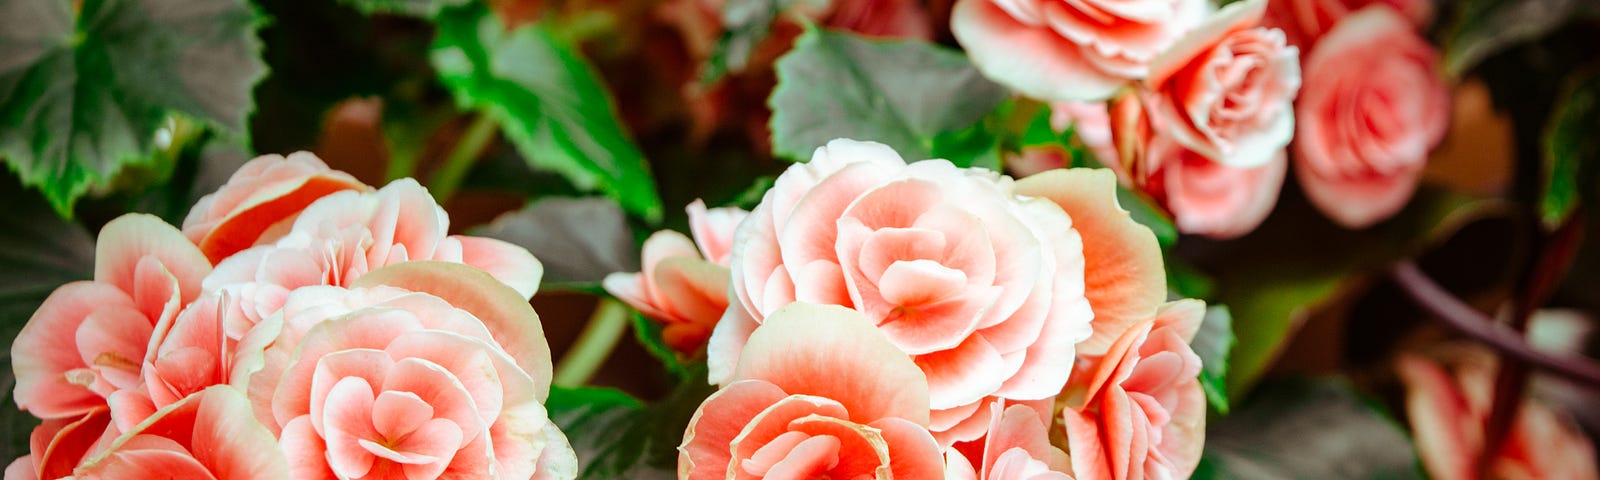 Coral-coloured roses in a garden.